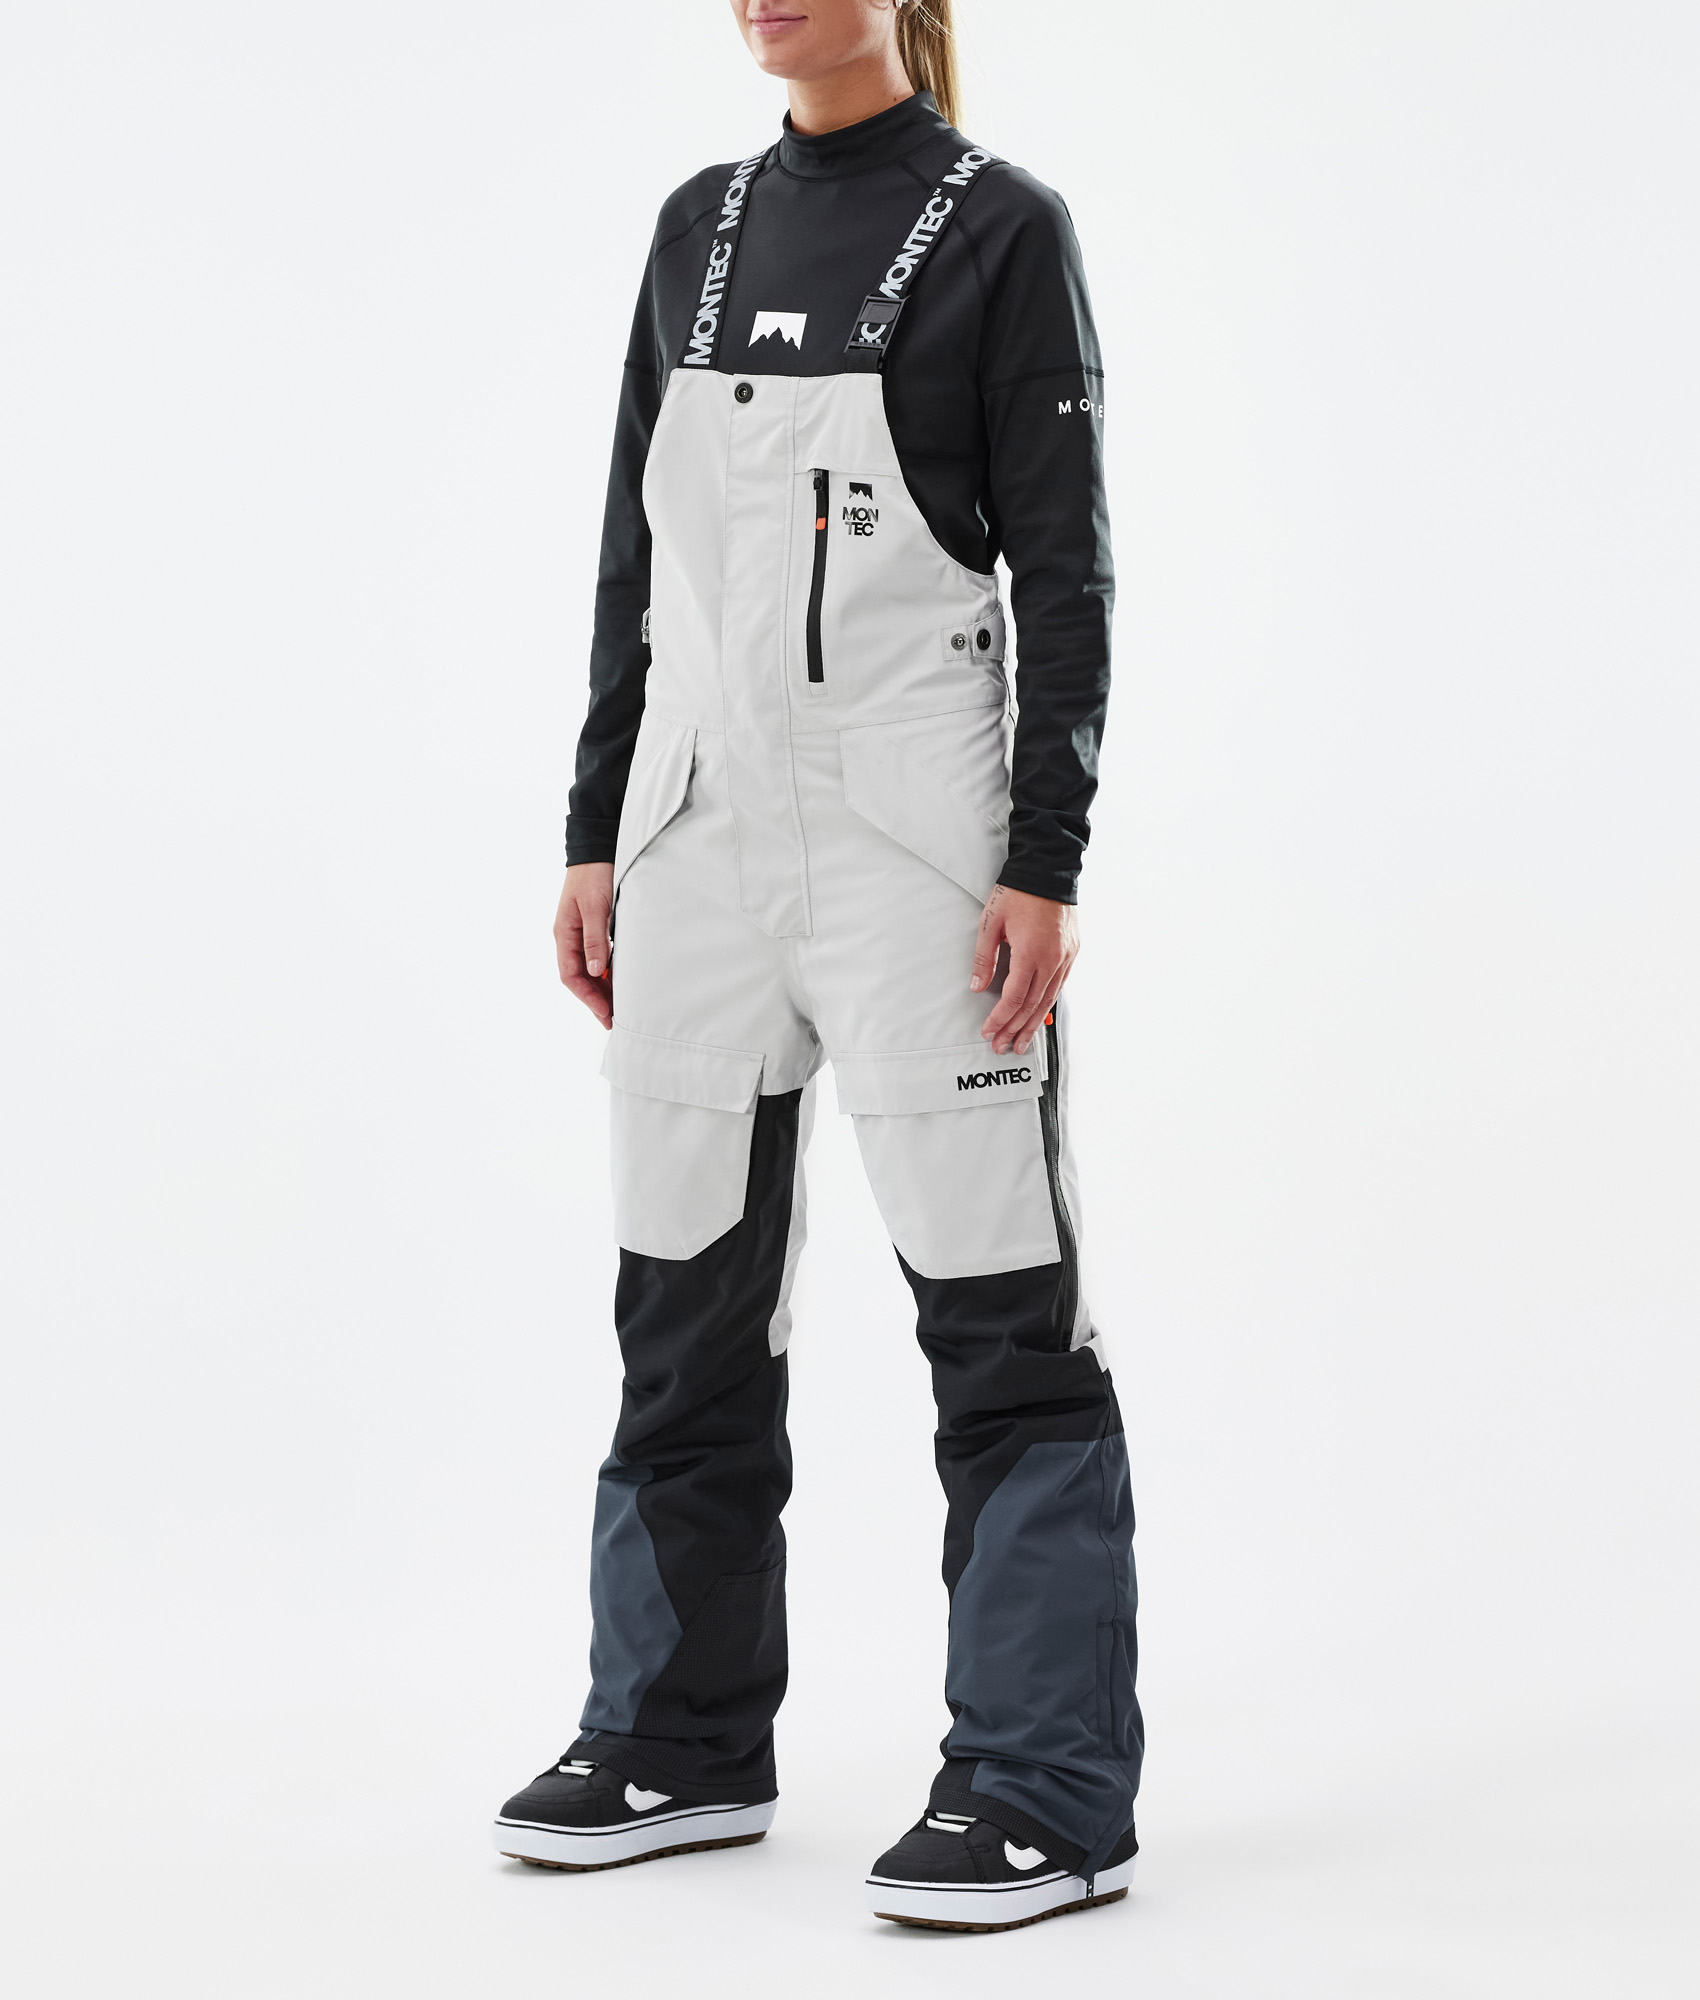  Bass Creek Outfitters Women's Ski Pants - Insulated Waterproof Snow  Bib Overalls (Size: S-3X), Size Small, Black : Clothing, Shoes & Jewelry